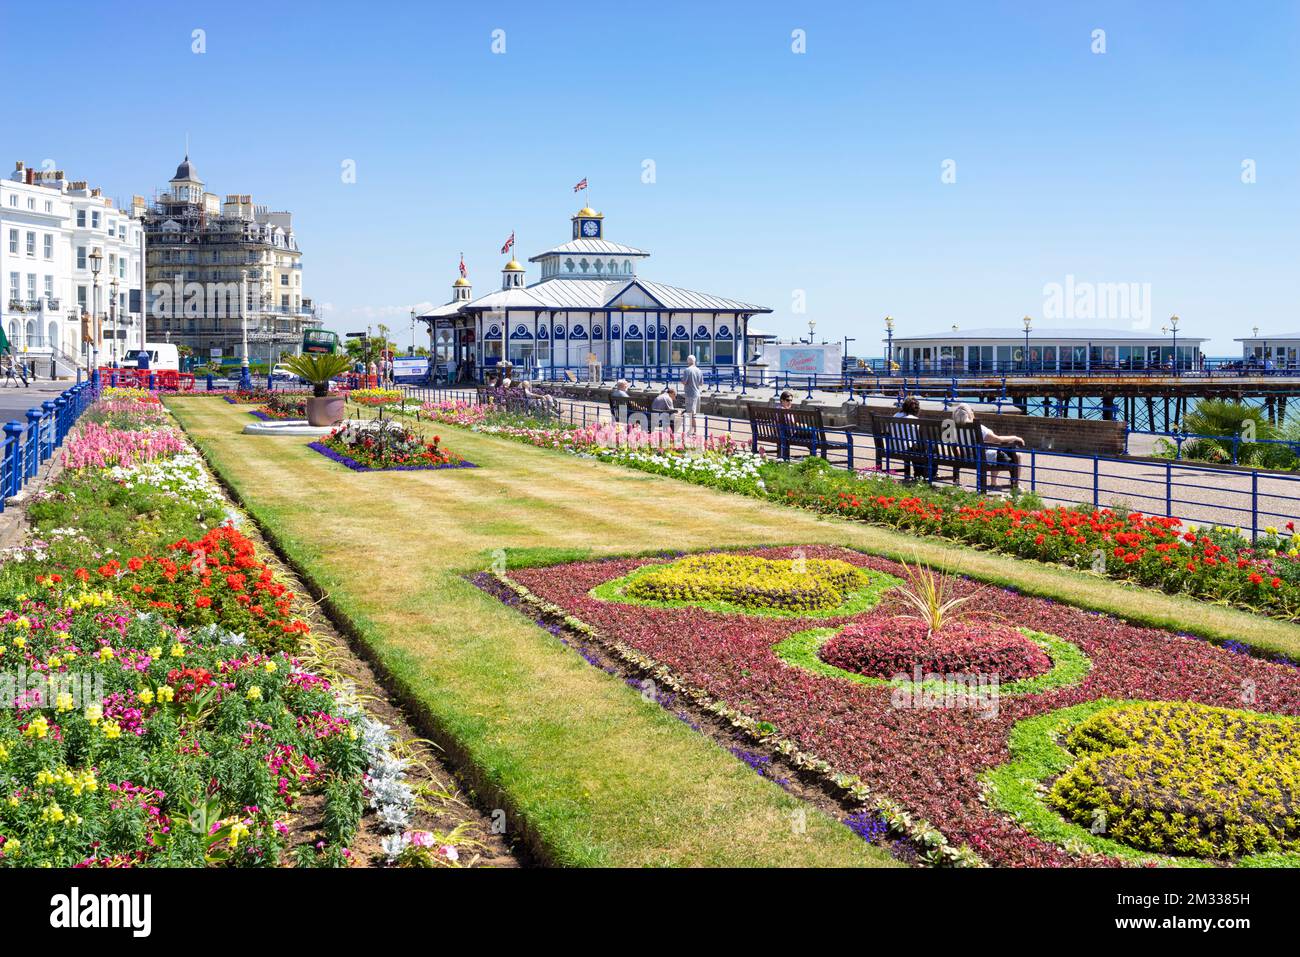 Eastbourne East Sussex the flower filled Carpet gardens on the seafront promenade and Eastbourne Pier Eastbourne East Sussex England GB UK Europe Stock Photo